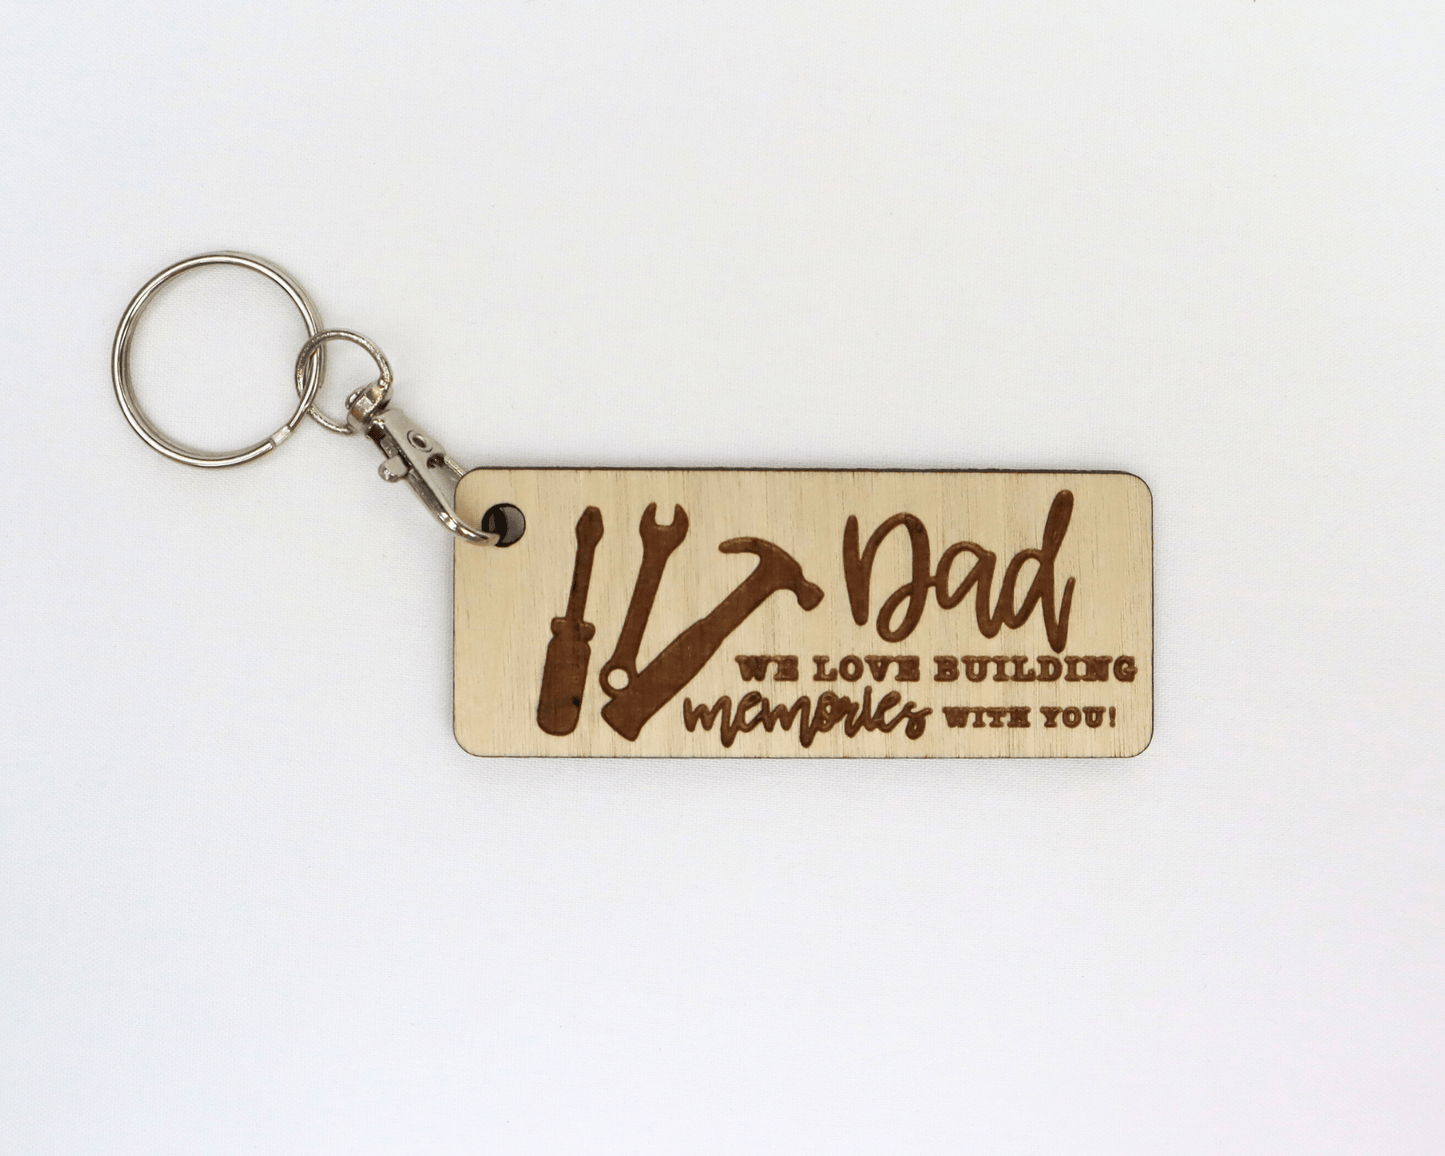 Dad We Love Building Memories With You | Keychain